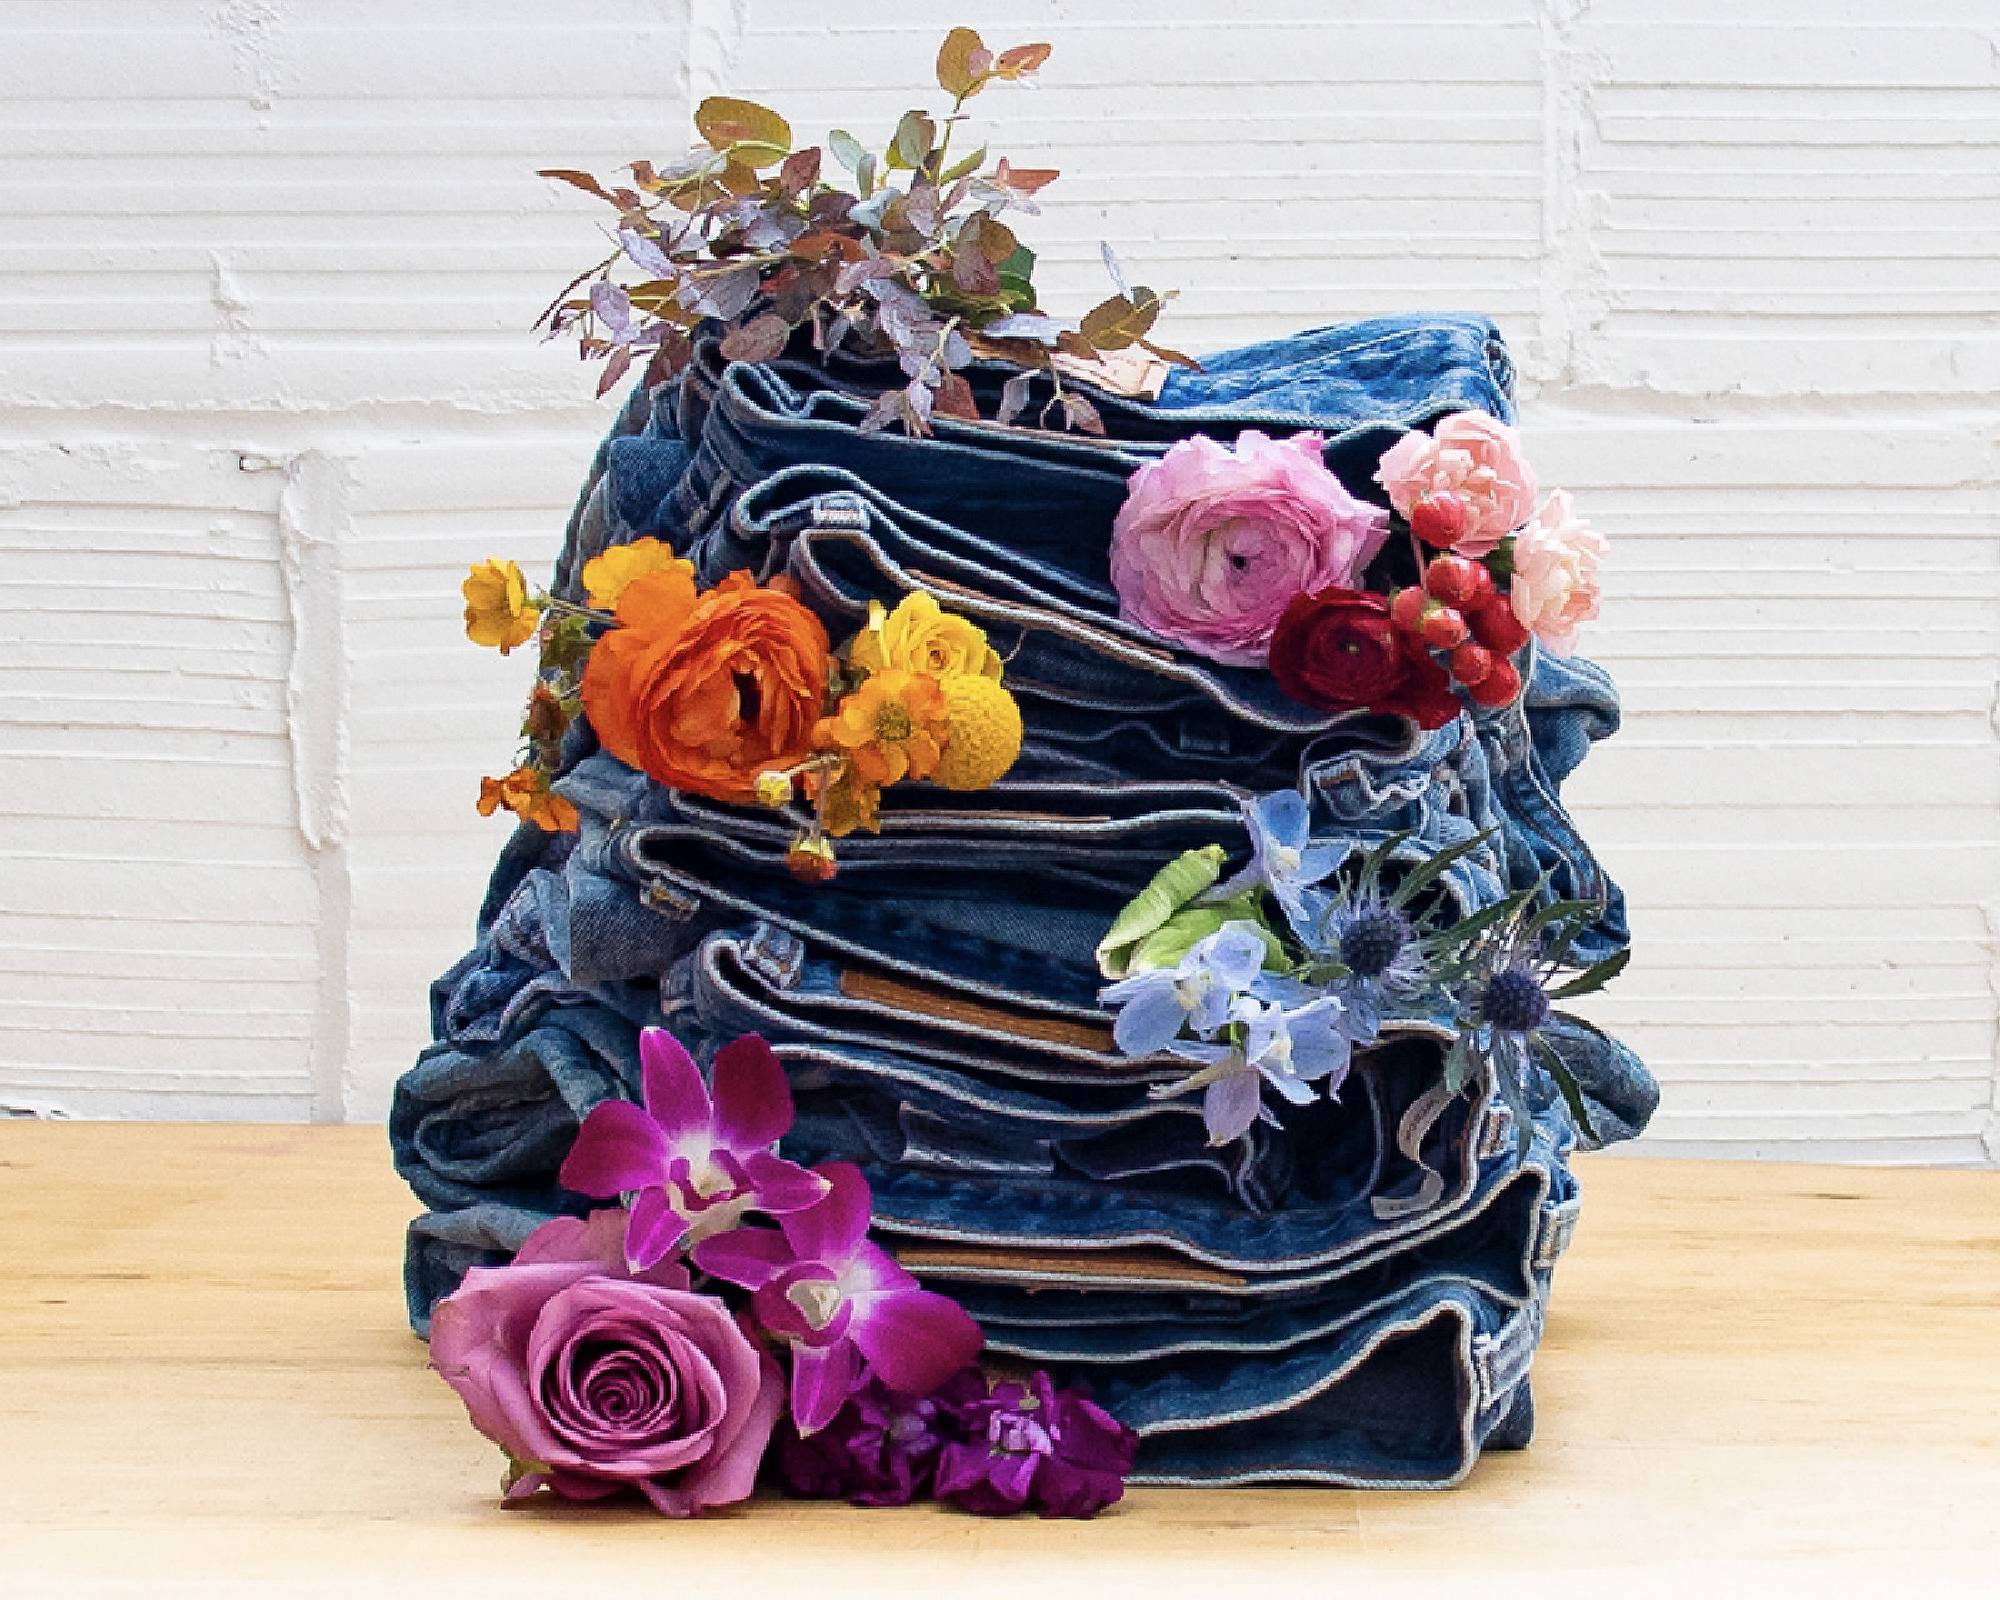 A stack of Levi jeans with flowers in between